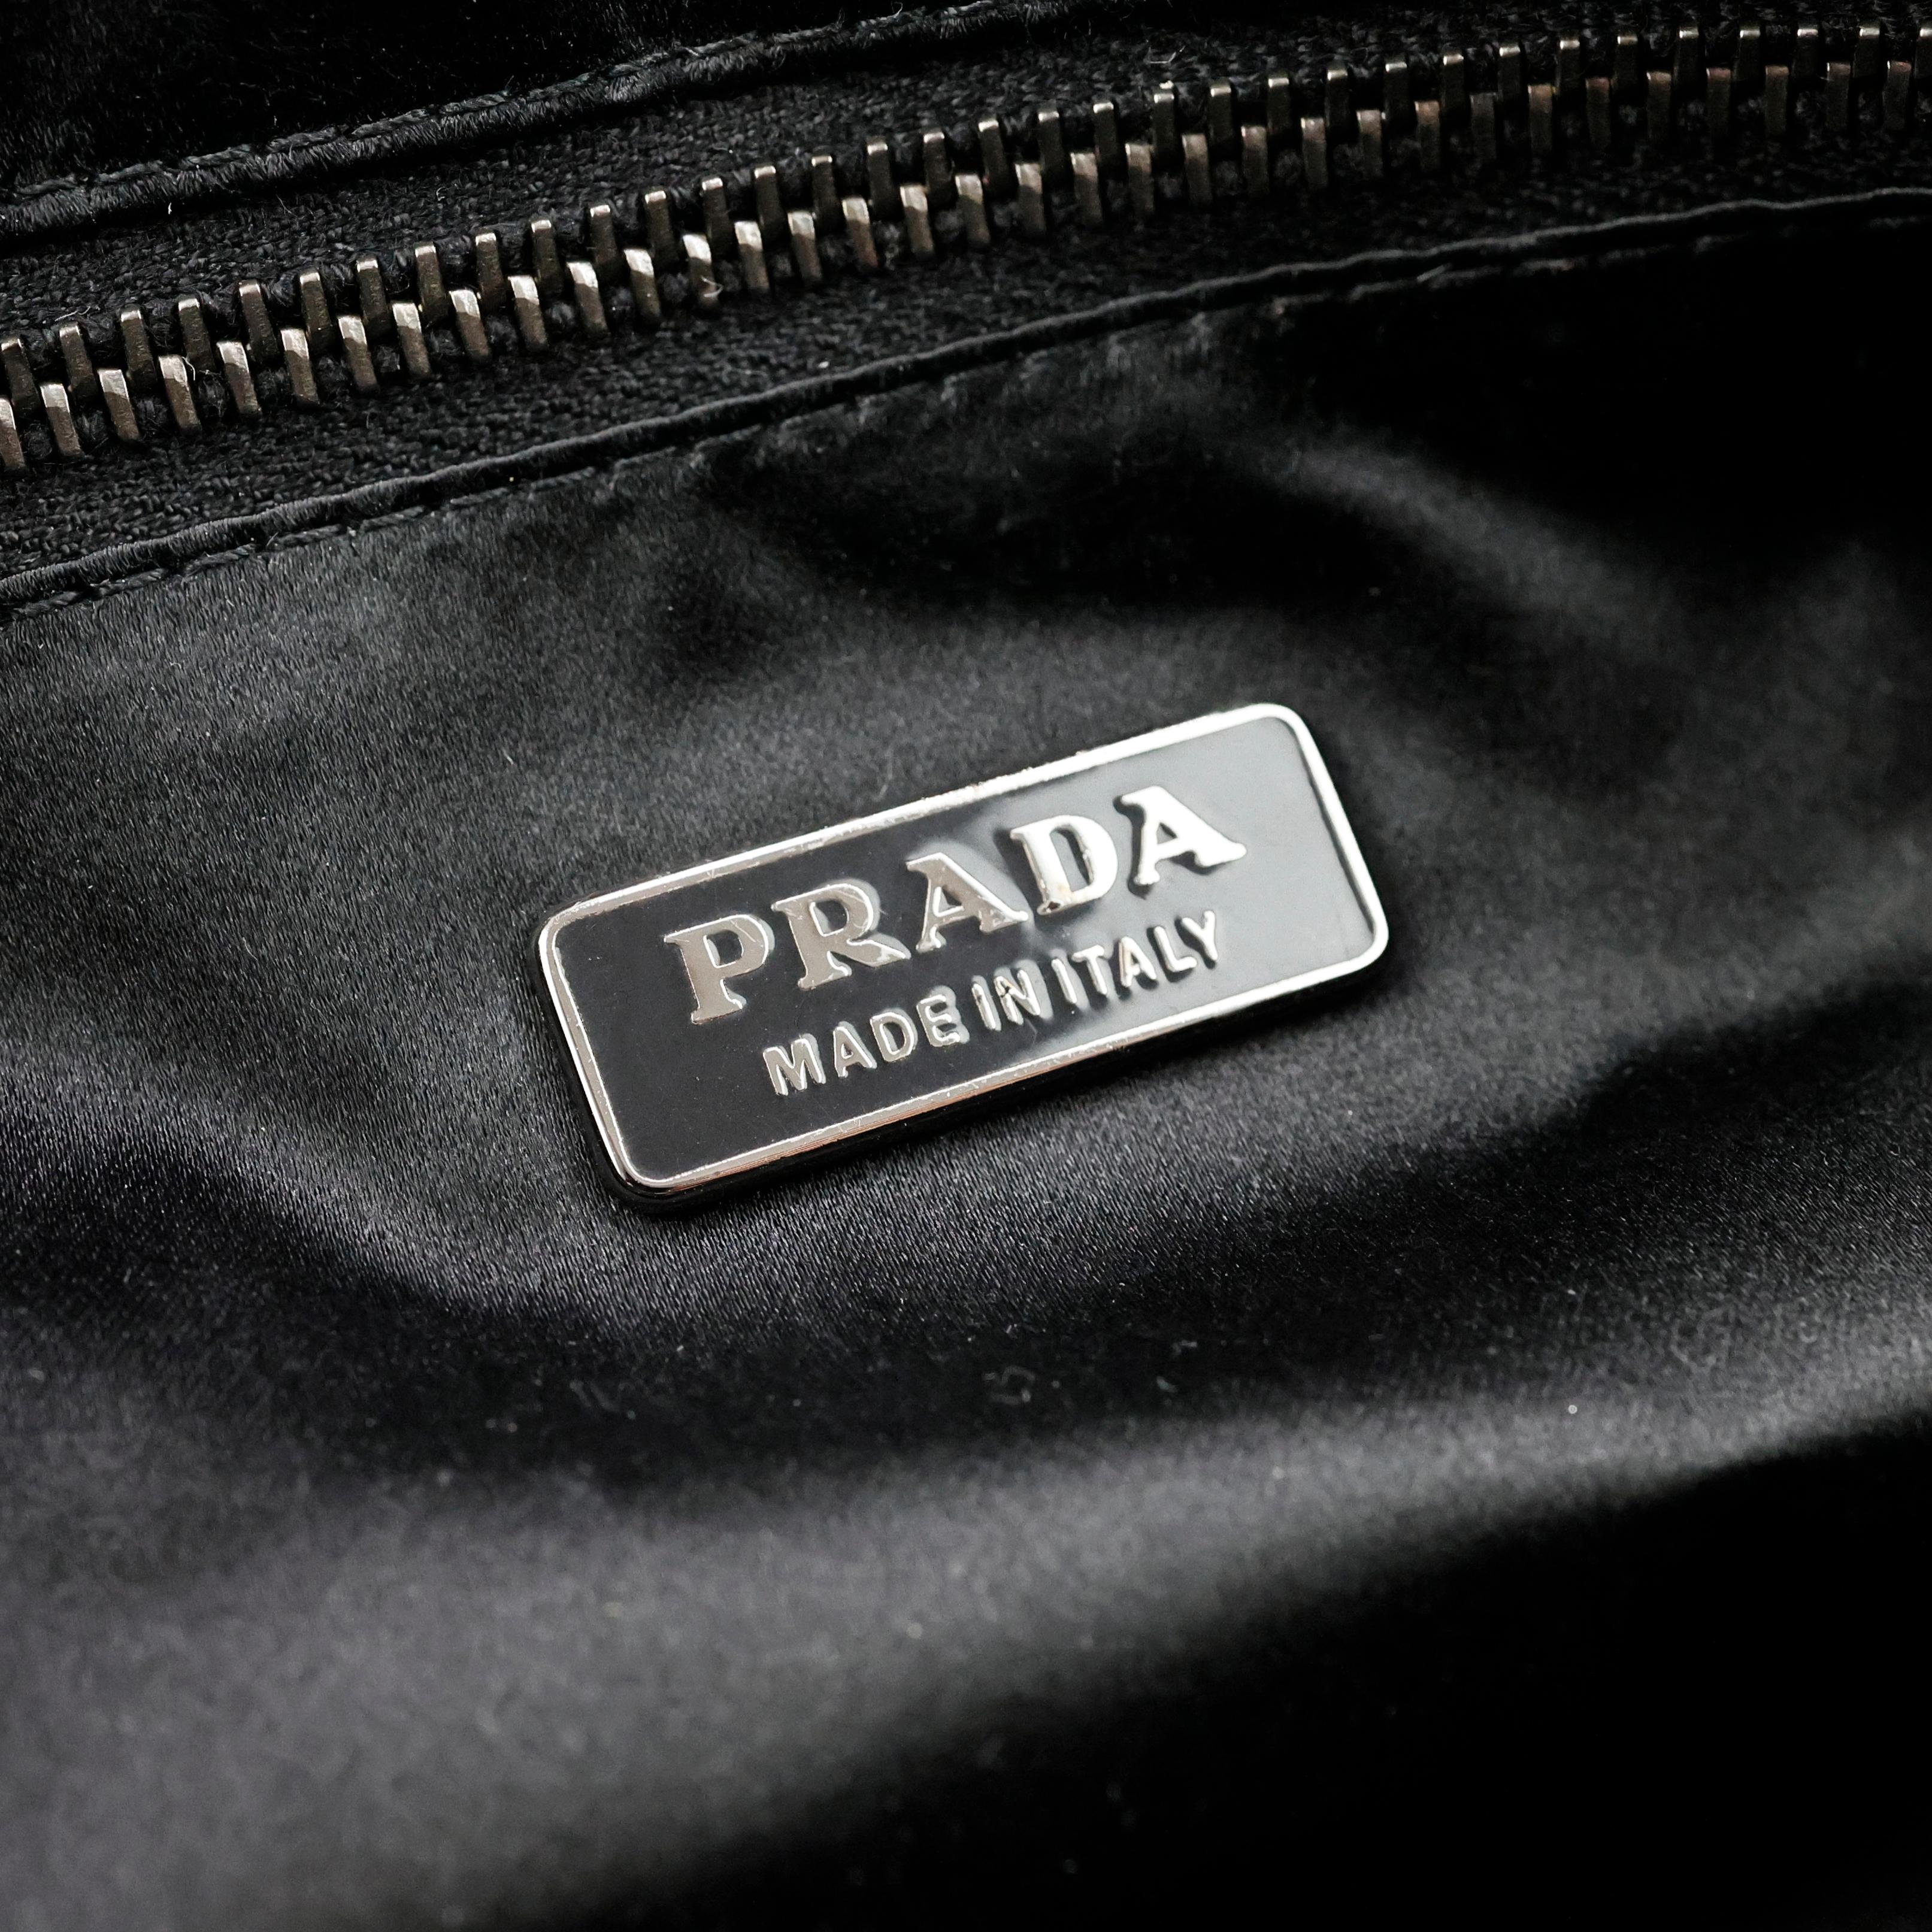 Prada Bag in black embroidered corduroy and silk For Sale 2